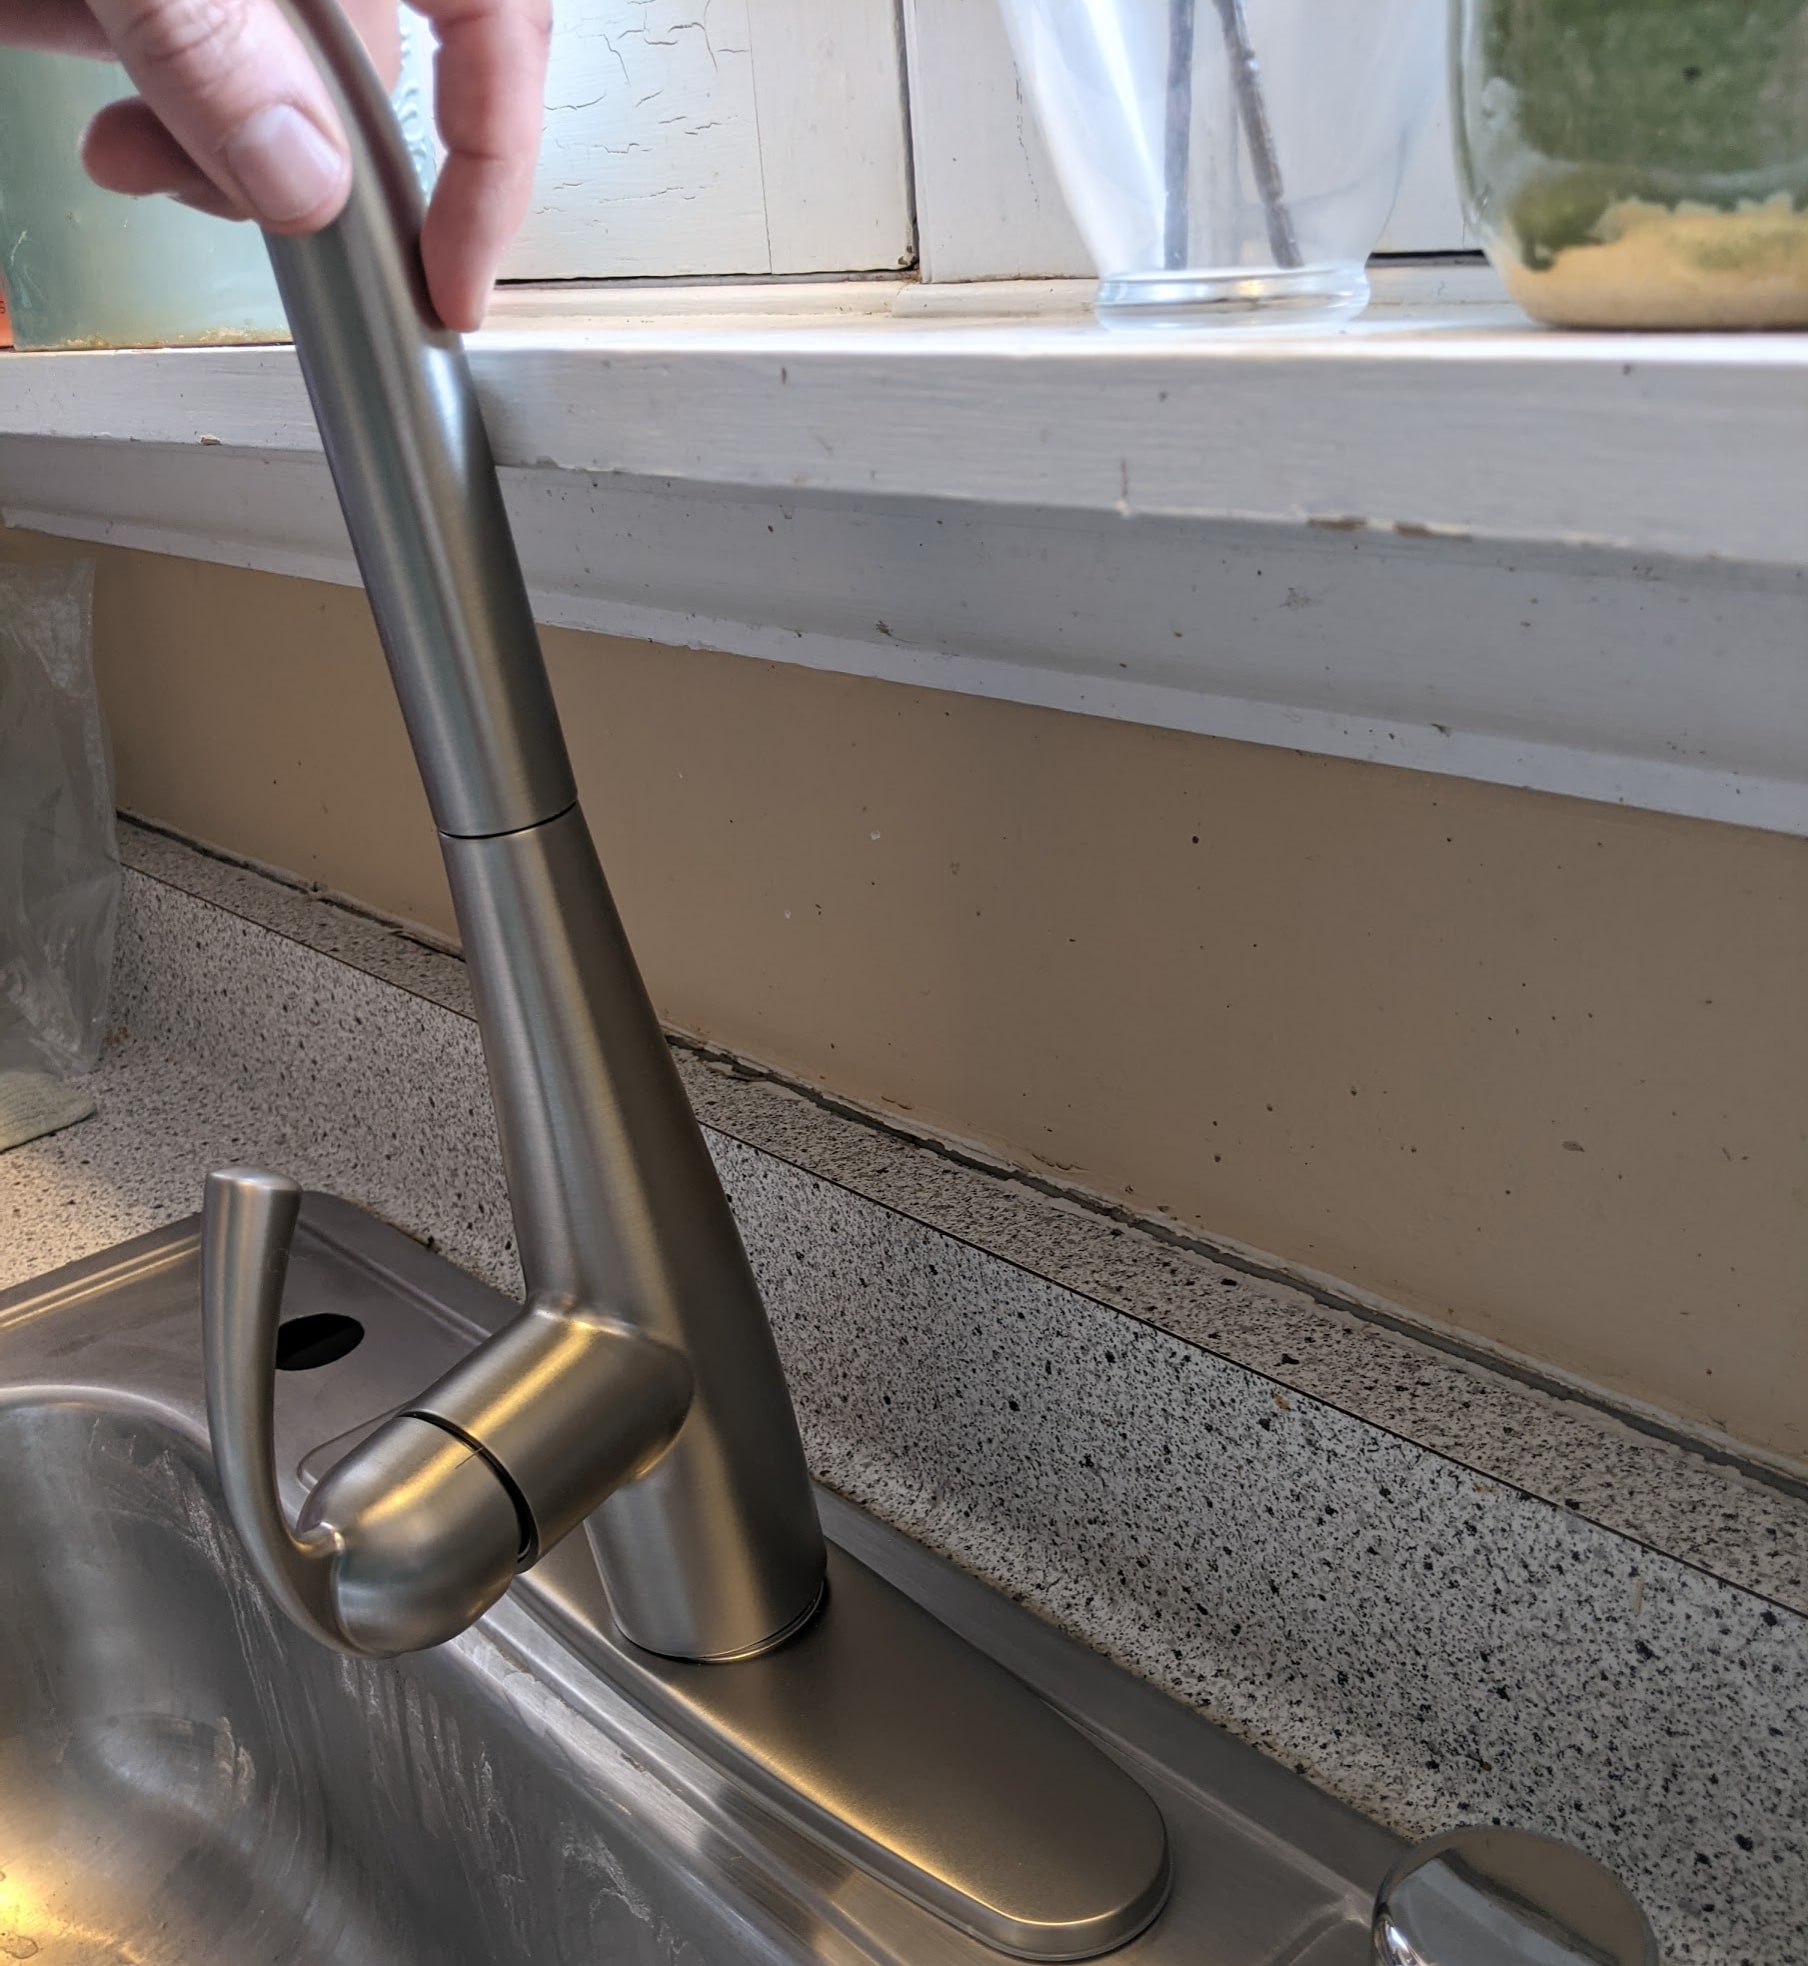 A kitchen faucet unable to be installed, due to a shelf obstructing it.